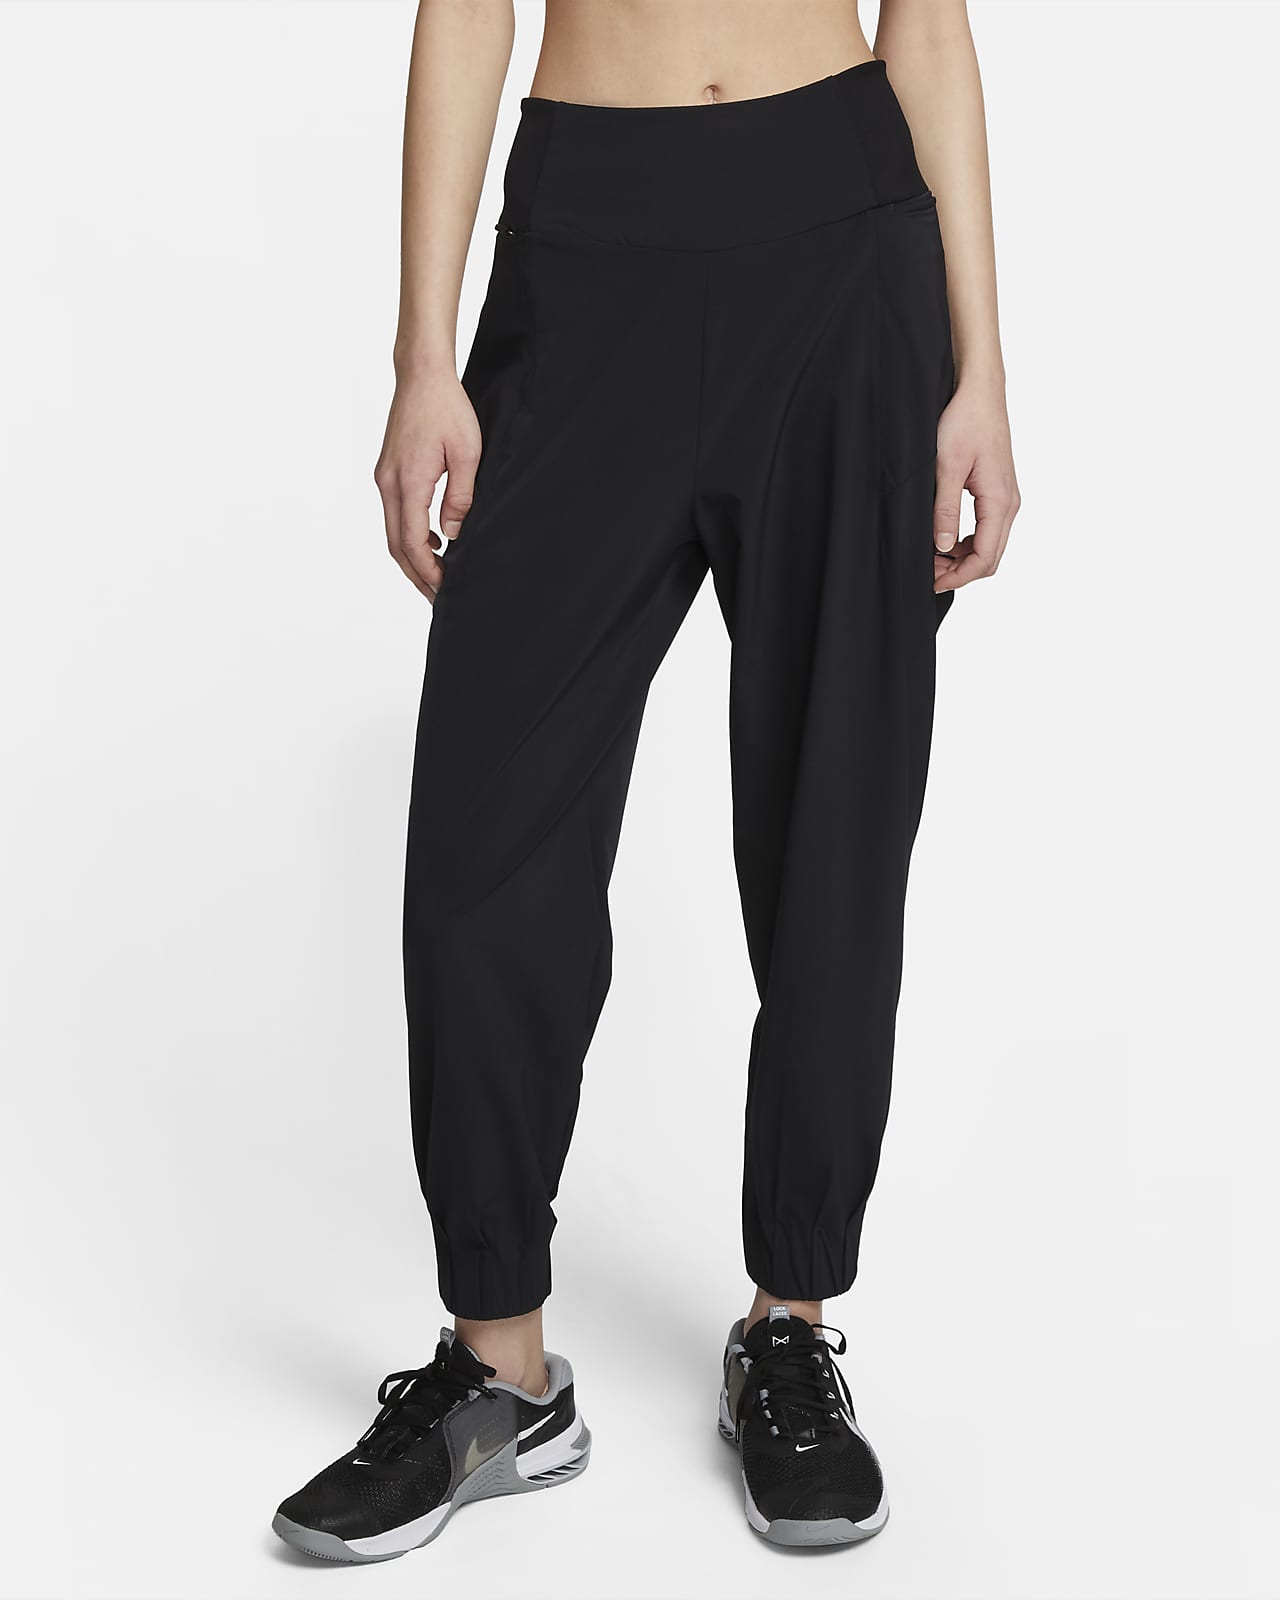 Nike Dri-FIT Bliss Women's High-Waisted 7/8 Trousers